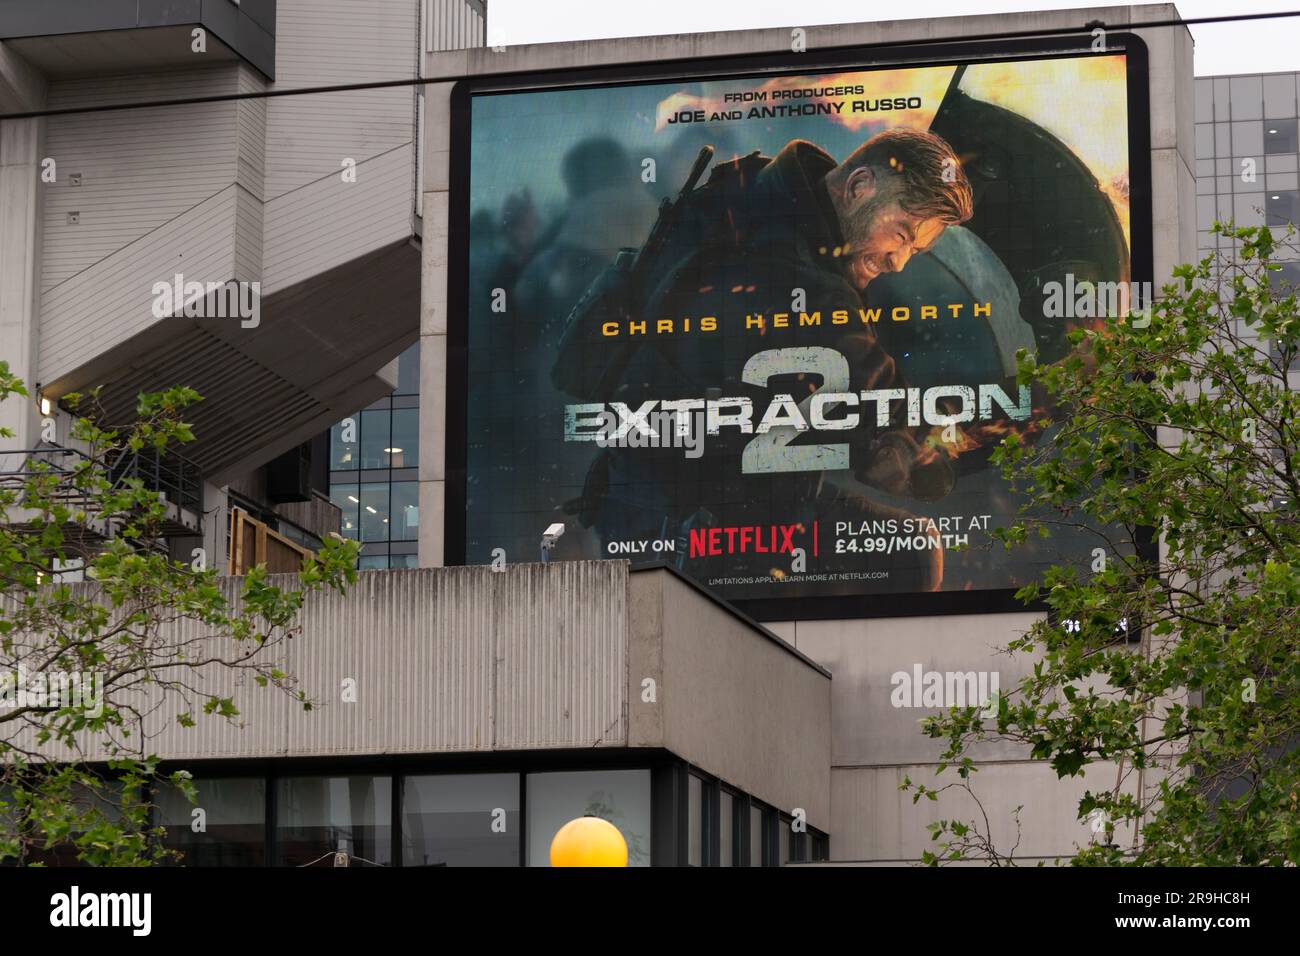 Display advert for Extraction 2 with image of Chris Hemsworth. Piccadilly Gardens, Manchester UK Stock Photo